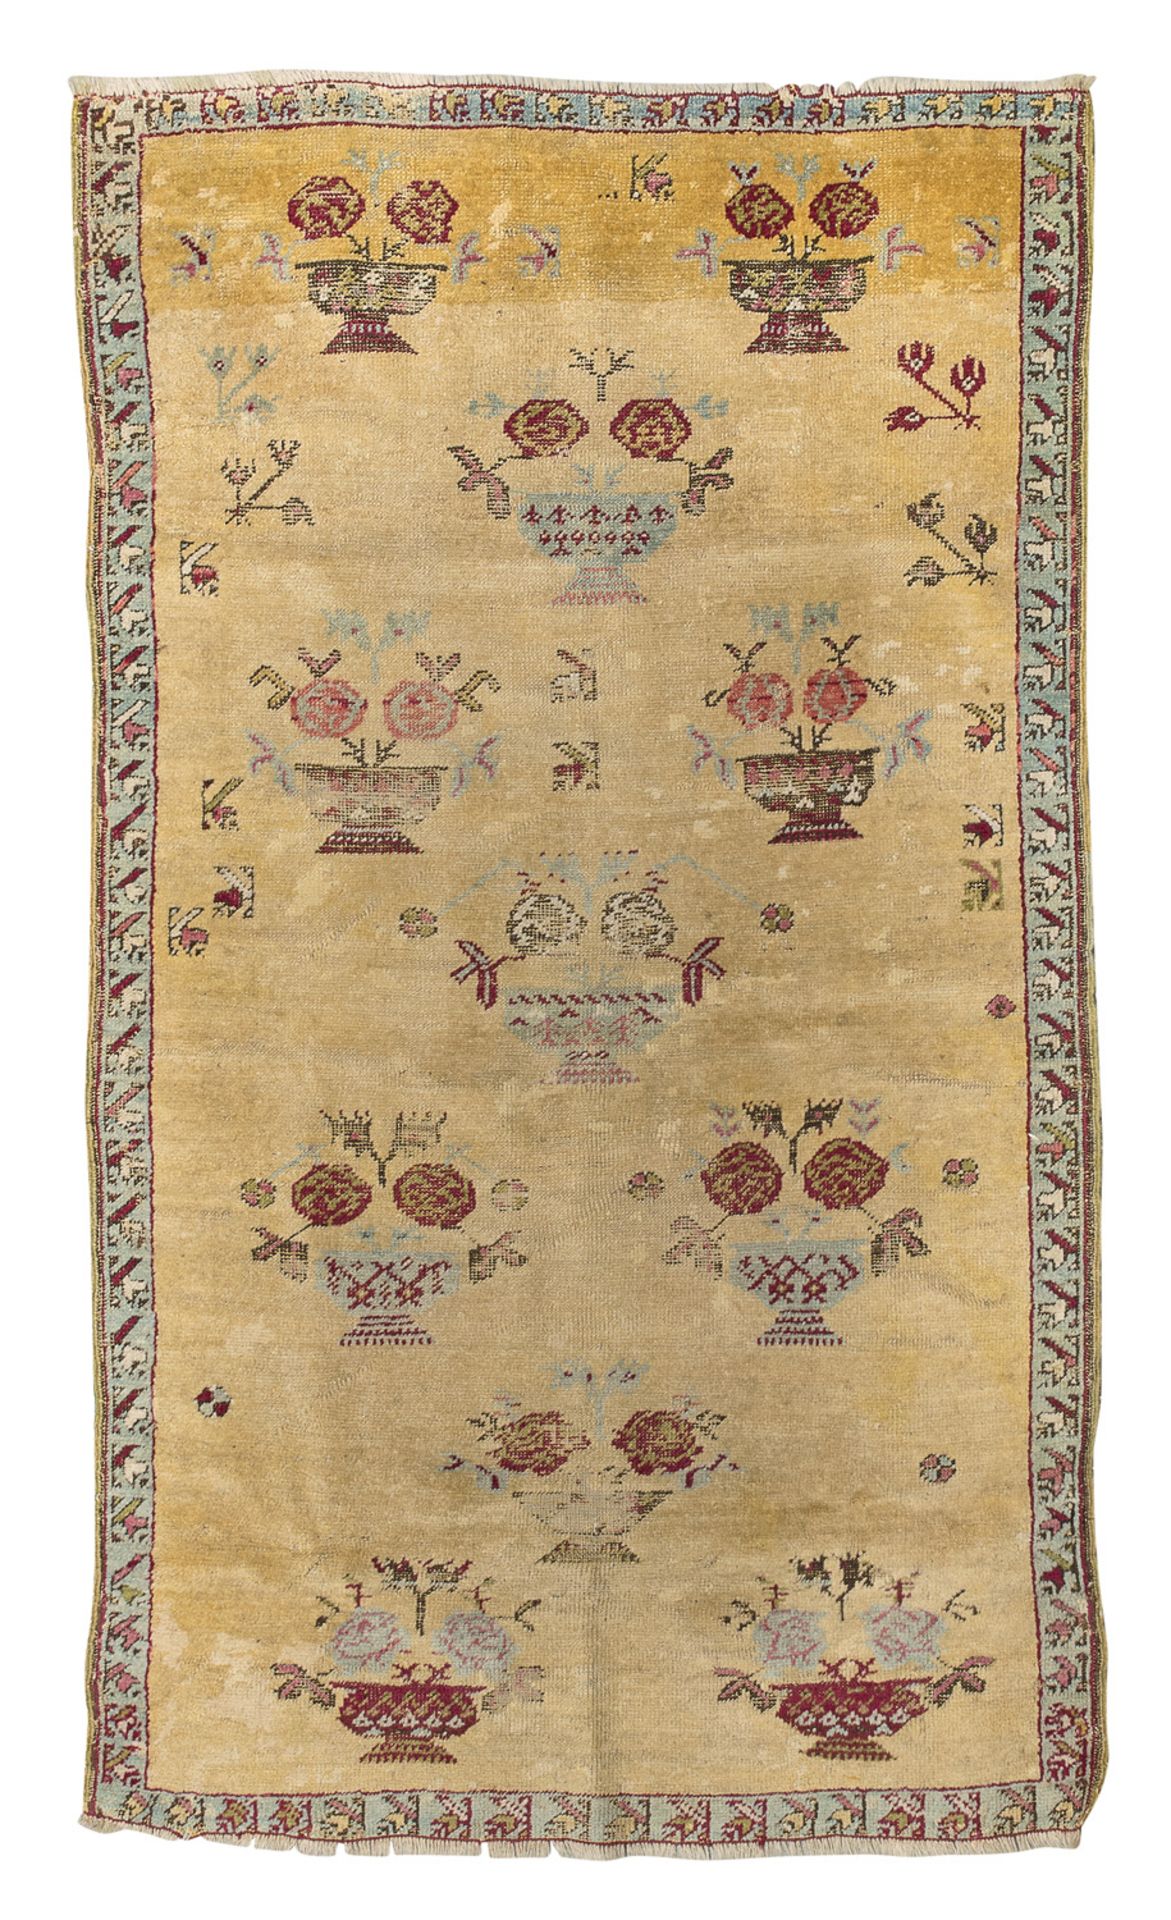 RARE CHINESE CARPET PROBABLY BEIJING LATE 19th CENTURY